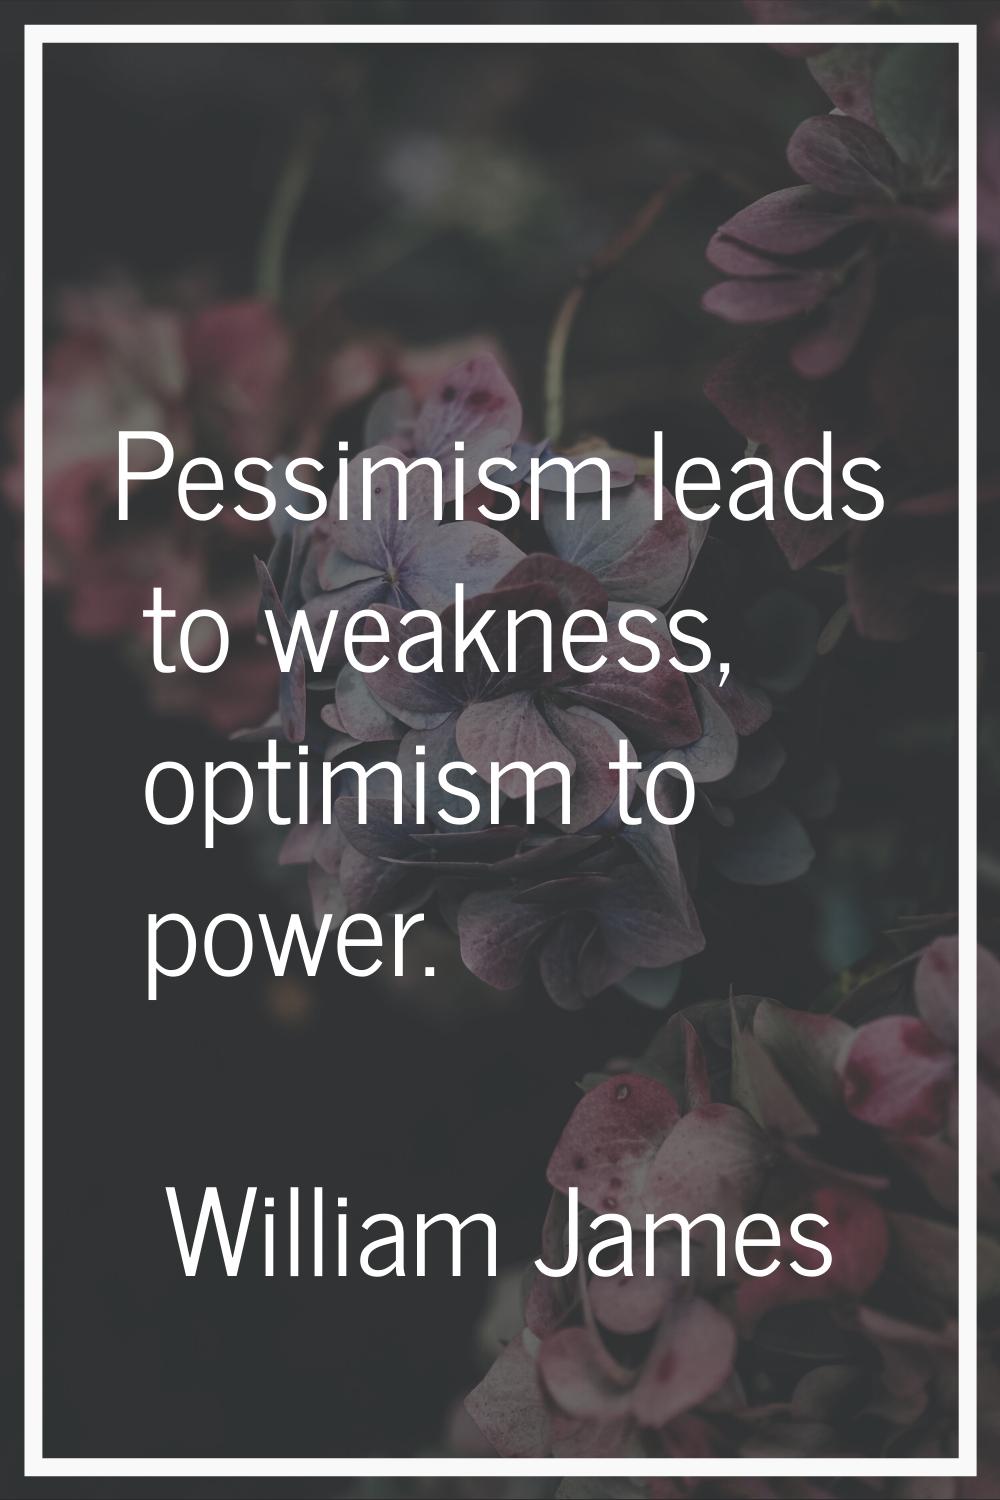 Pessimism leads to weakness, optimism to power.